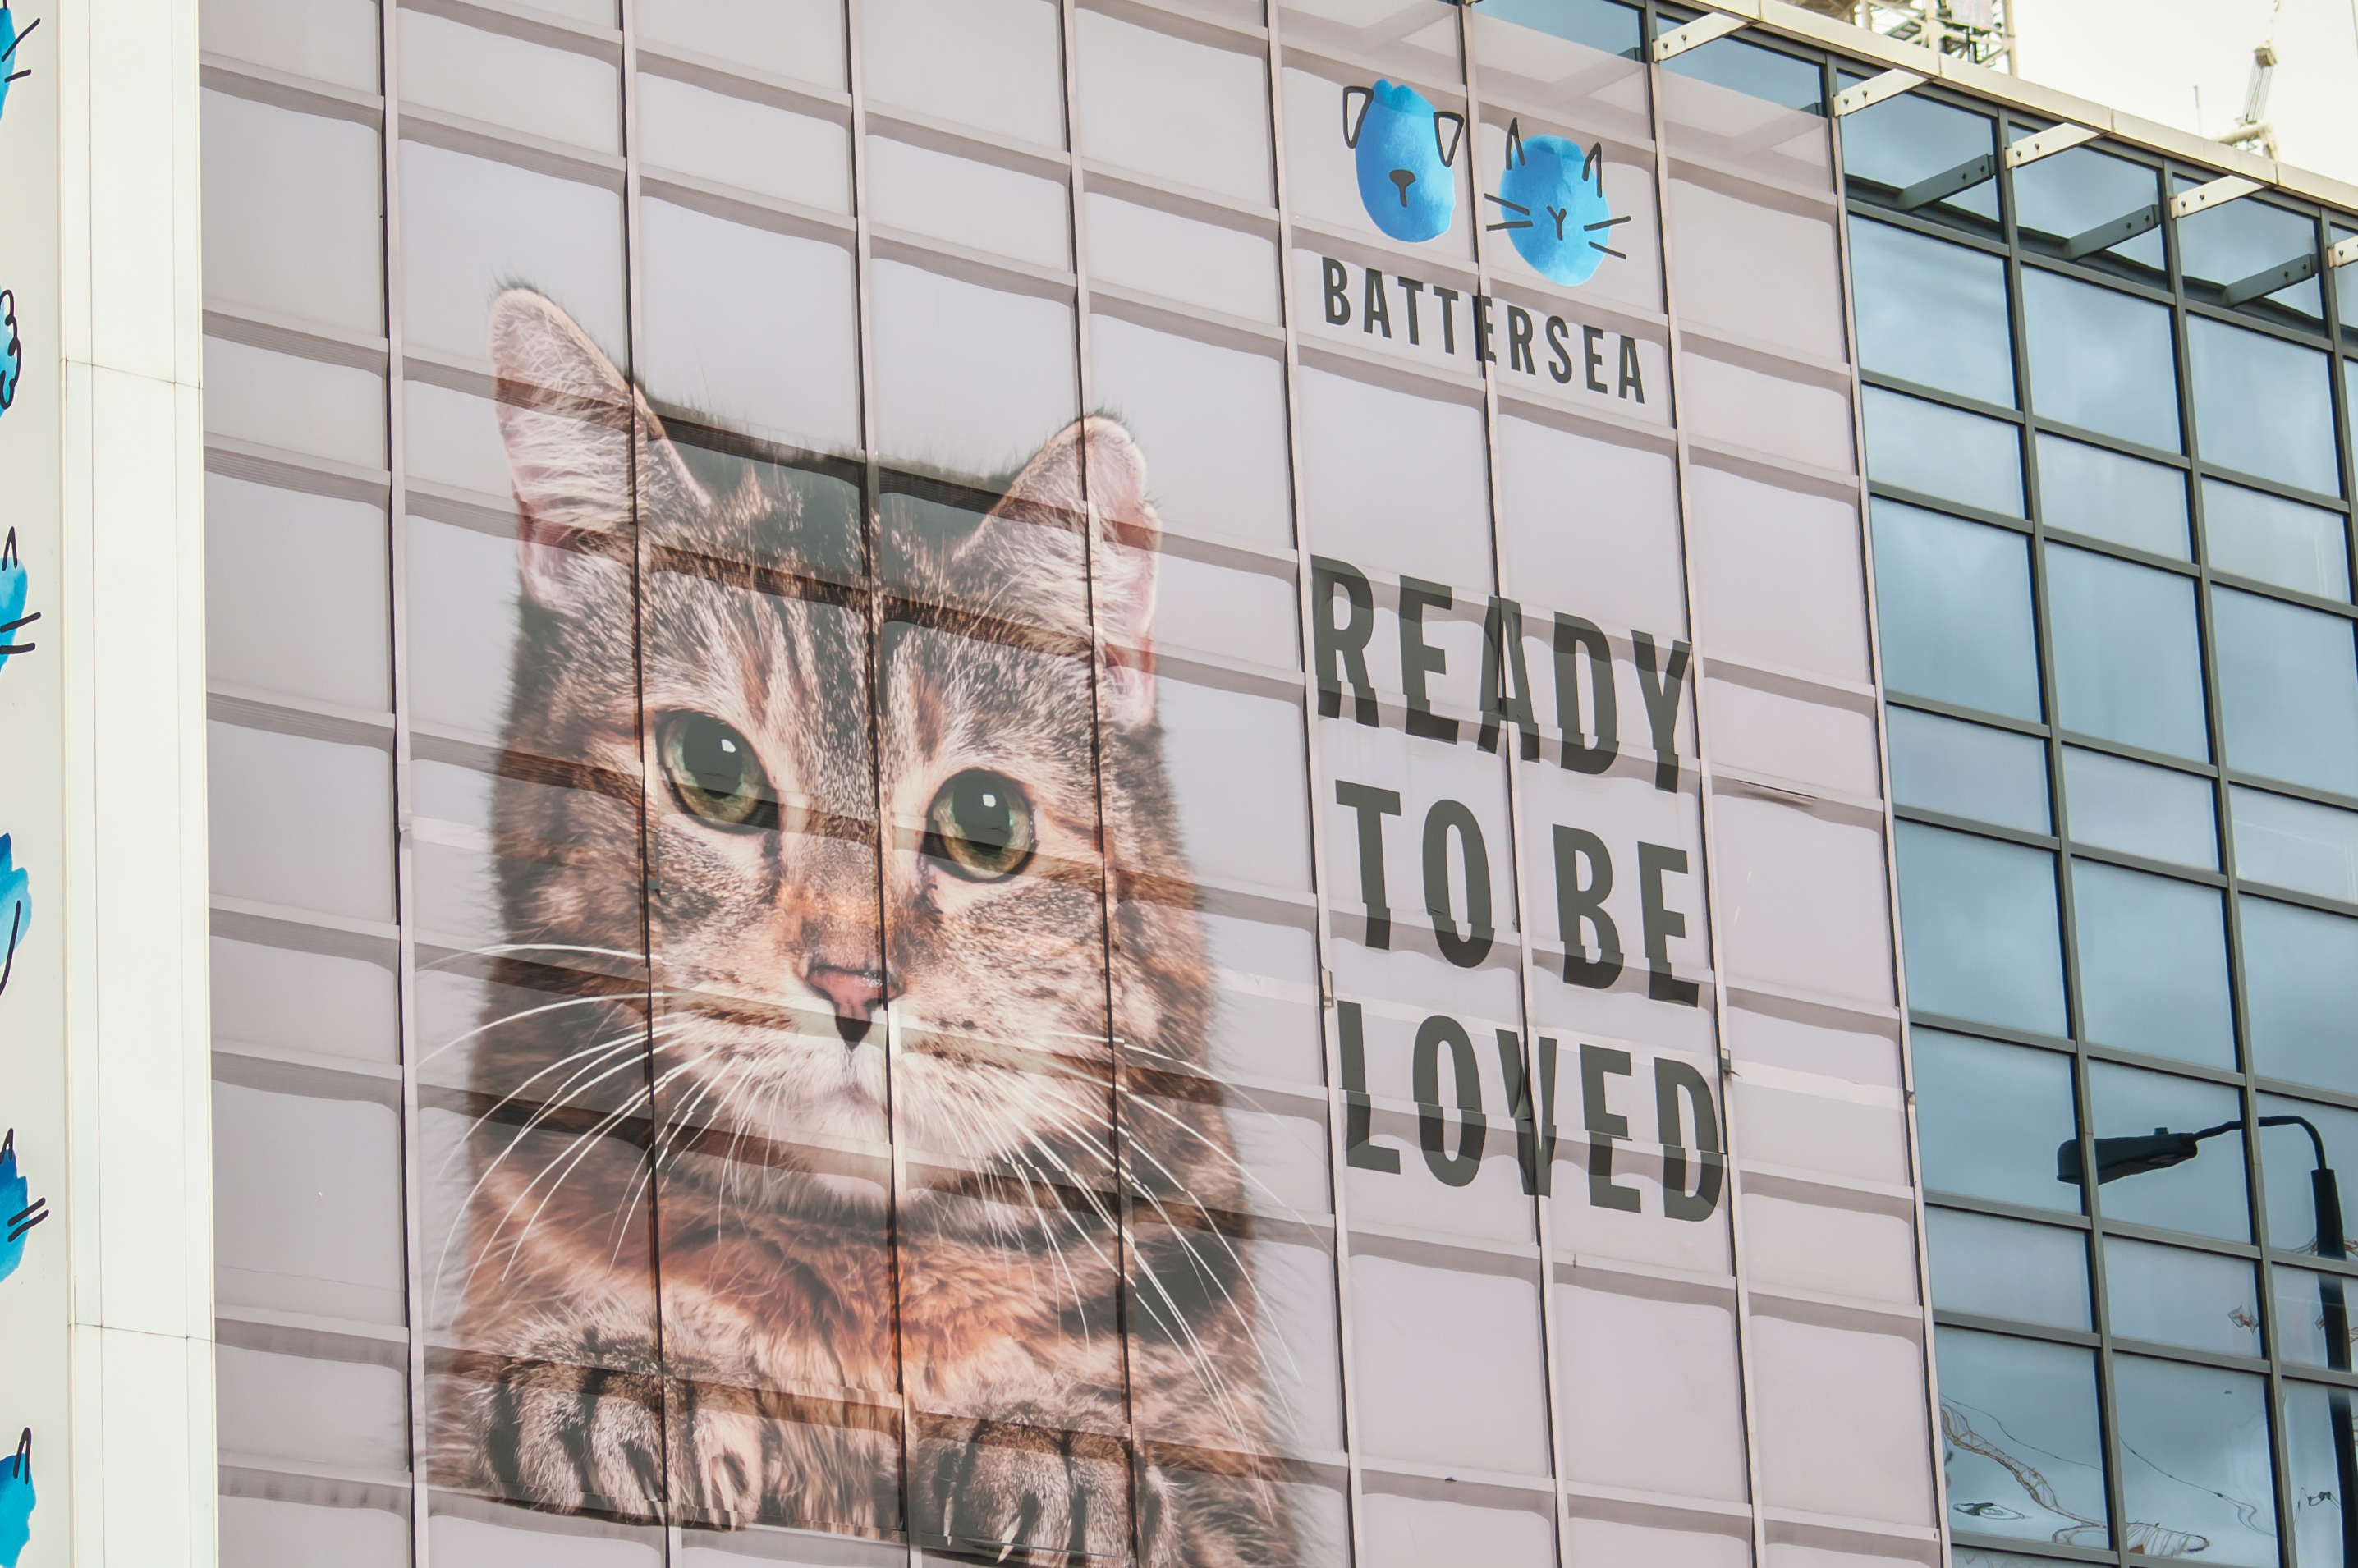 Billboard of a cat with text that says "Ready to be loved"